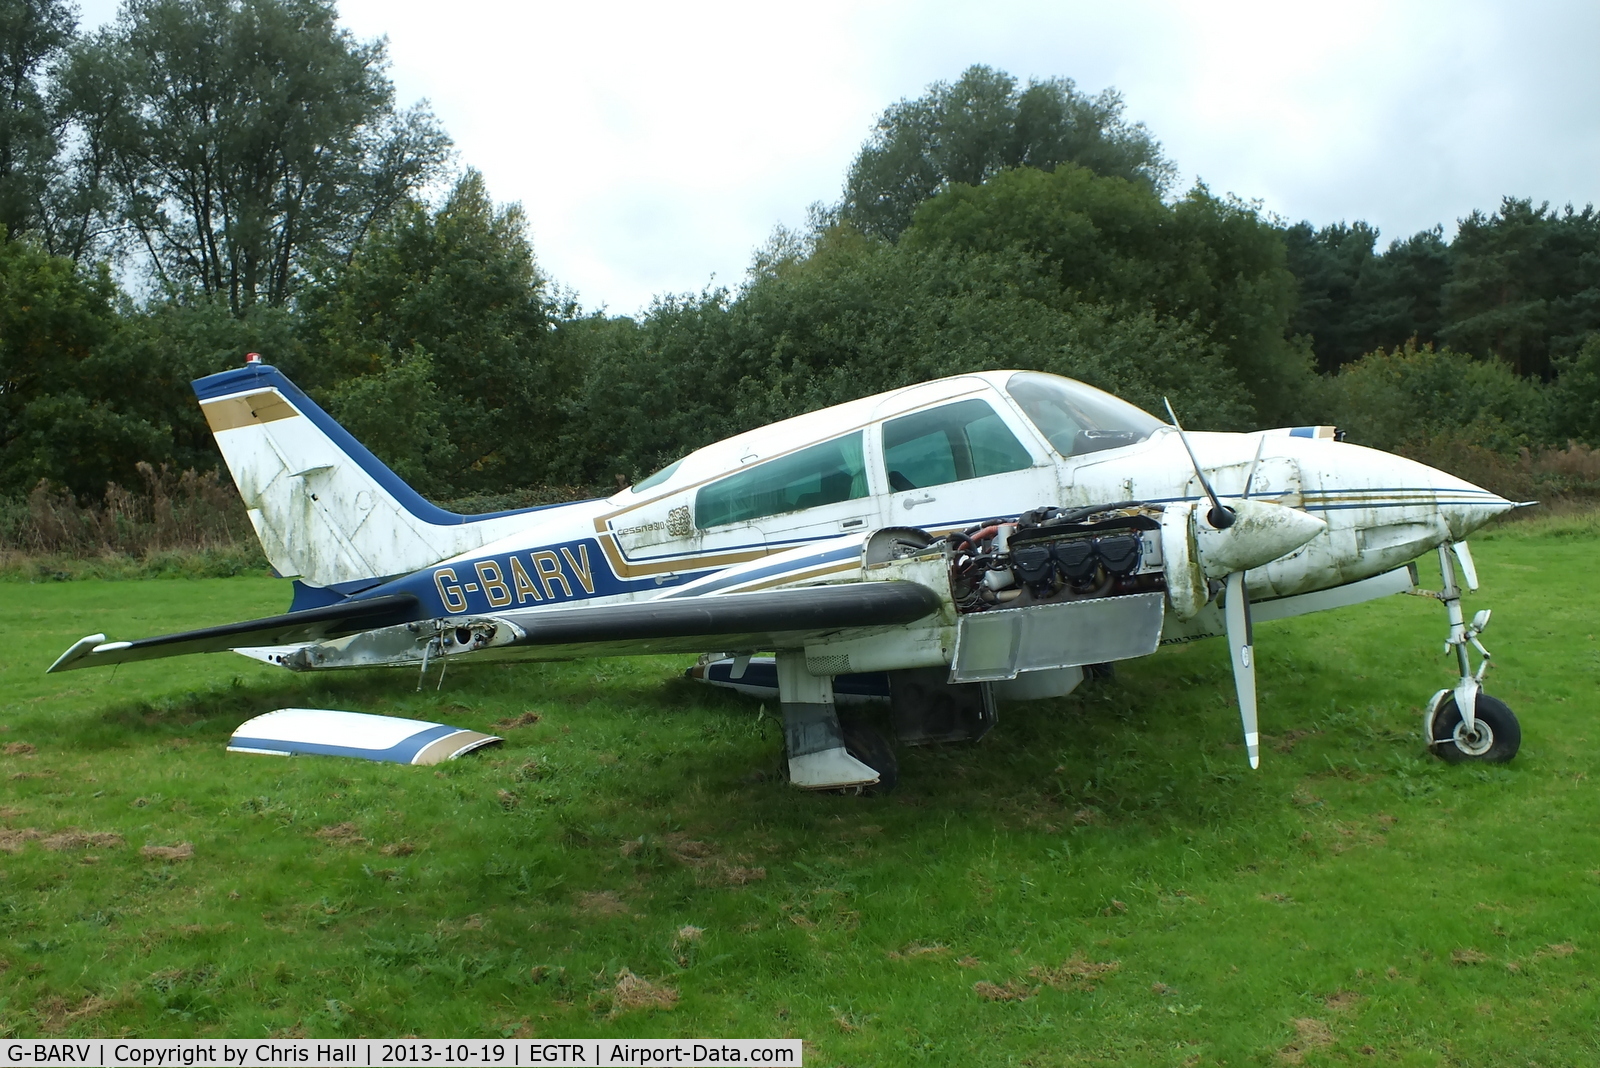 G-BARV, 1973 Cessna 310Q C/N 310Q-0774, parked with the other wrecks & relics at Elstree